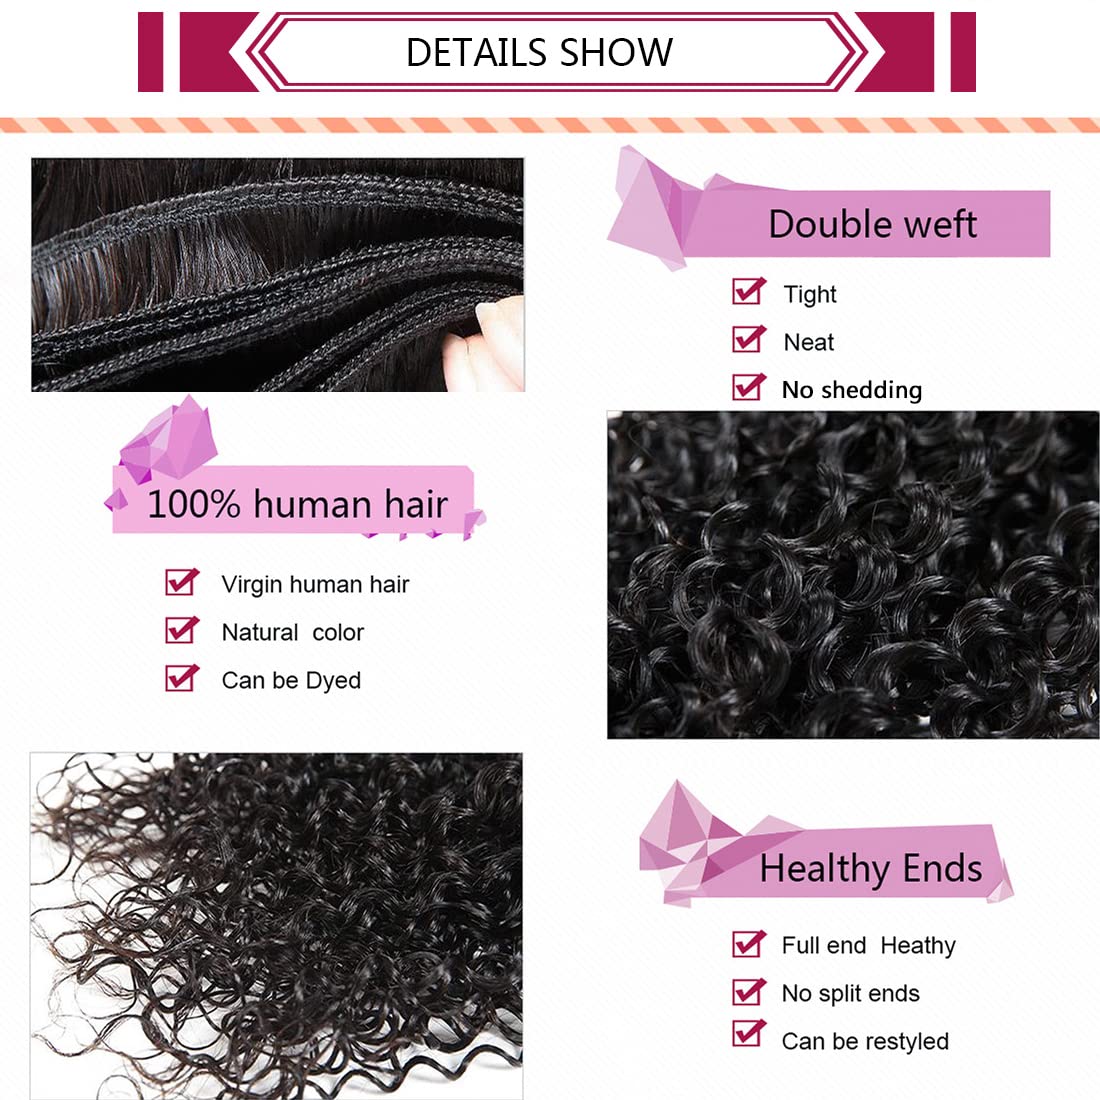 Kinky Curly Clip in Hair details